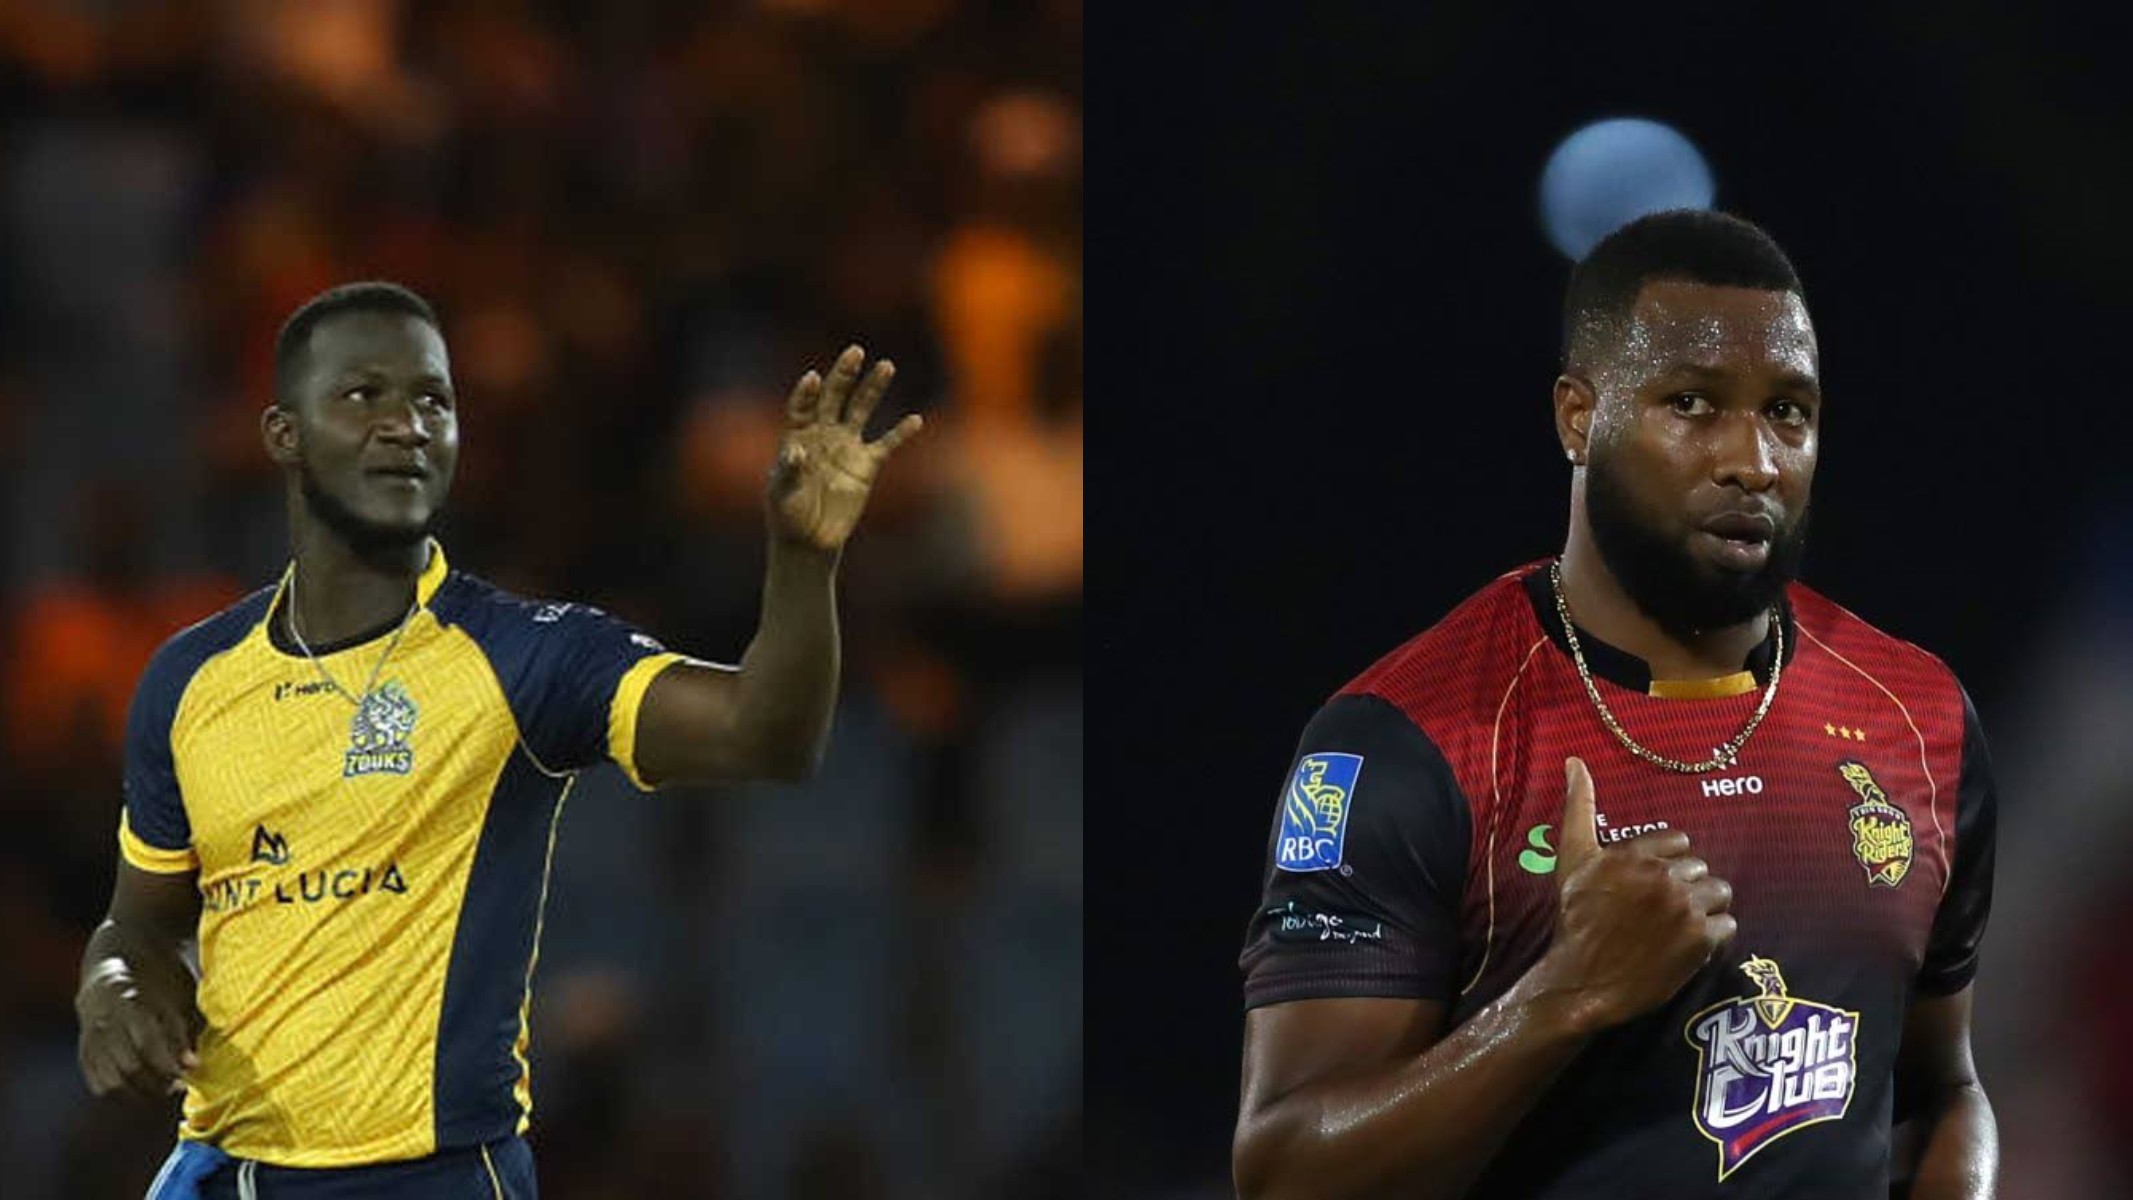 Match 27, Trinbago Knight Riders v St Lucia Zouks- Fantasy Tips, Playing XIs, Weather and Pitch